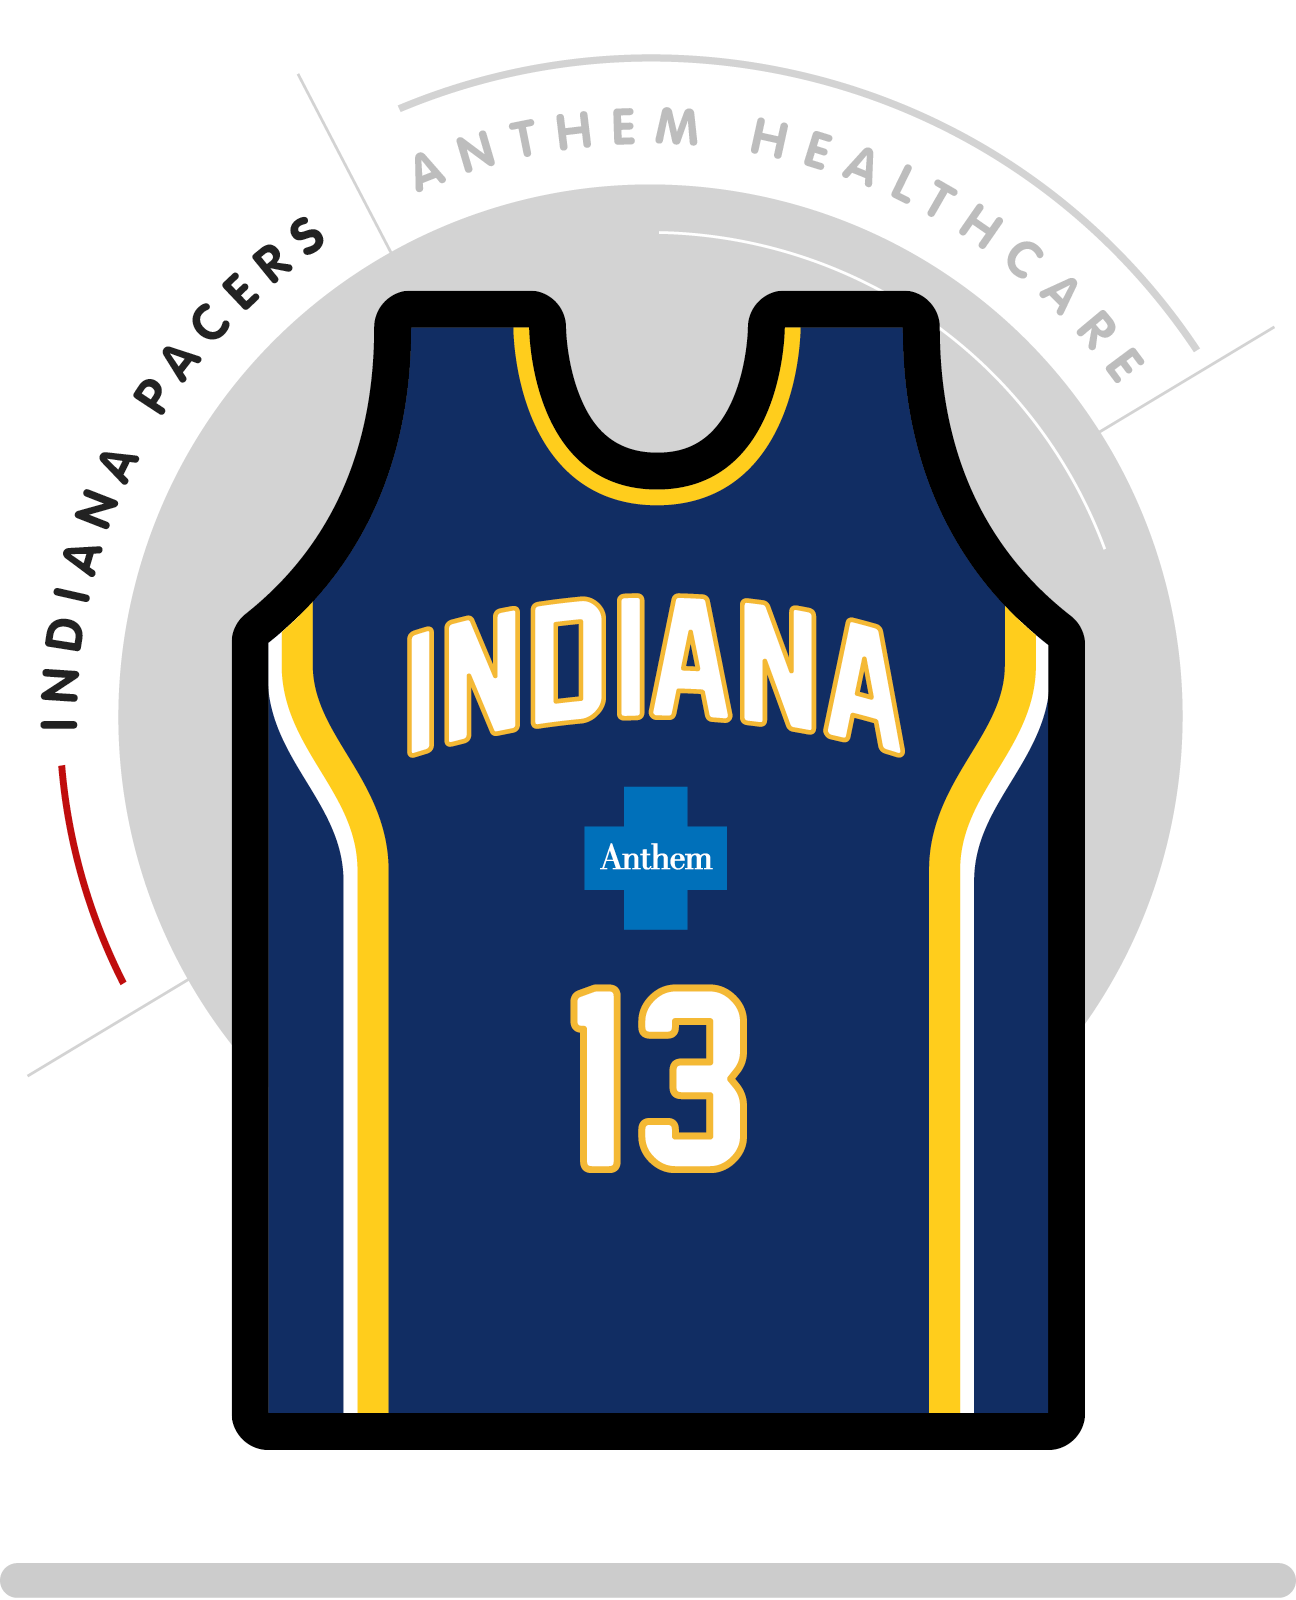 NBA Jerseys Re-Imagined with Corporate Logos1296 x 1600